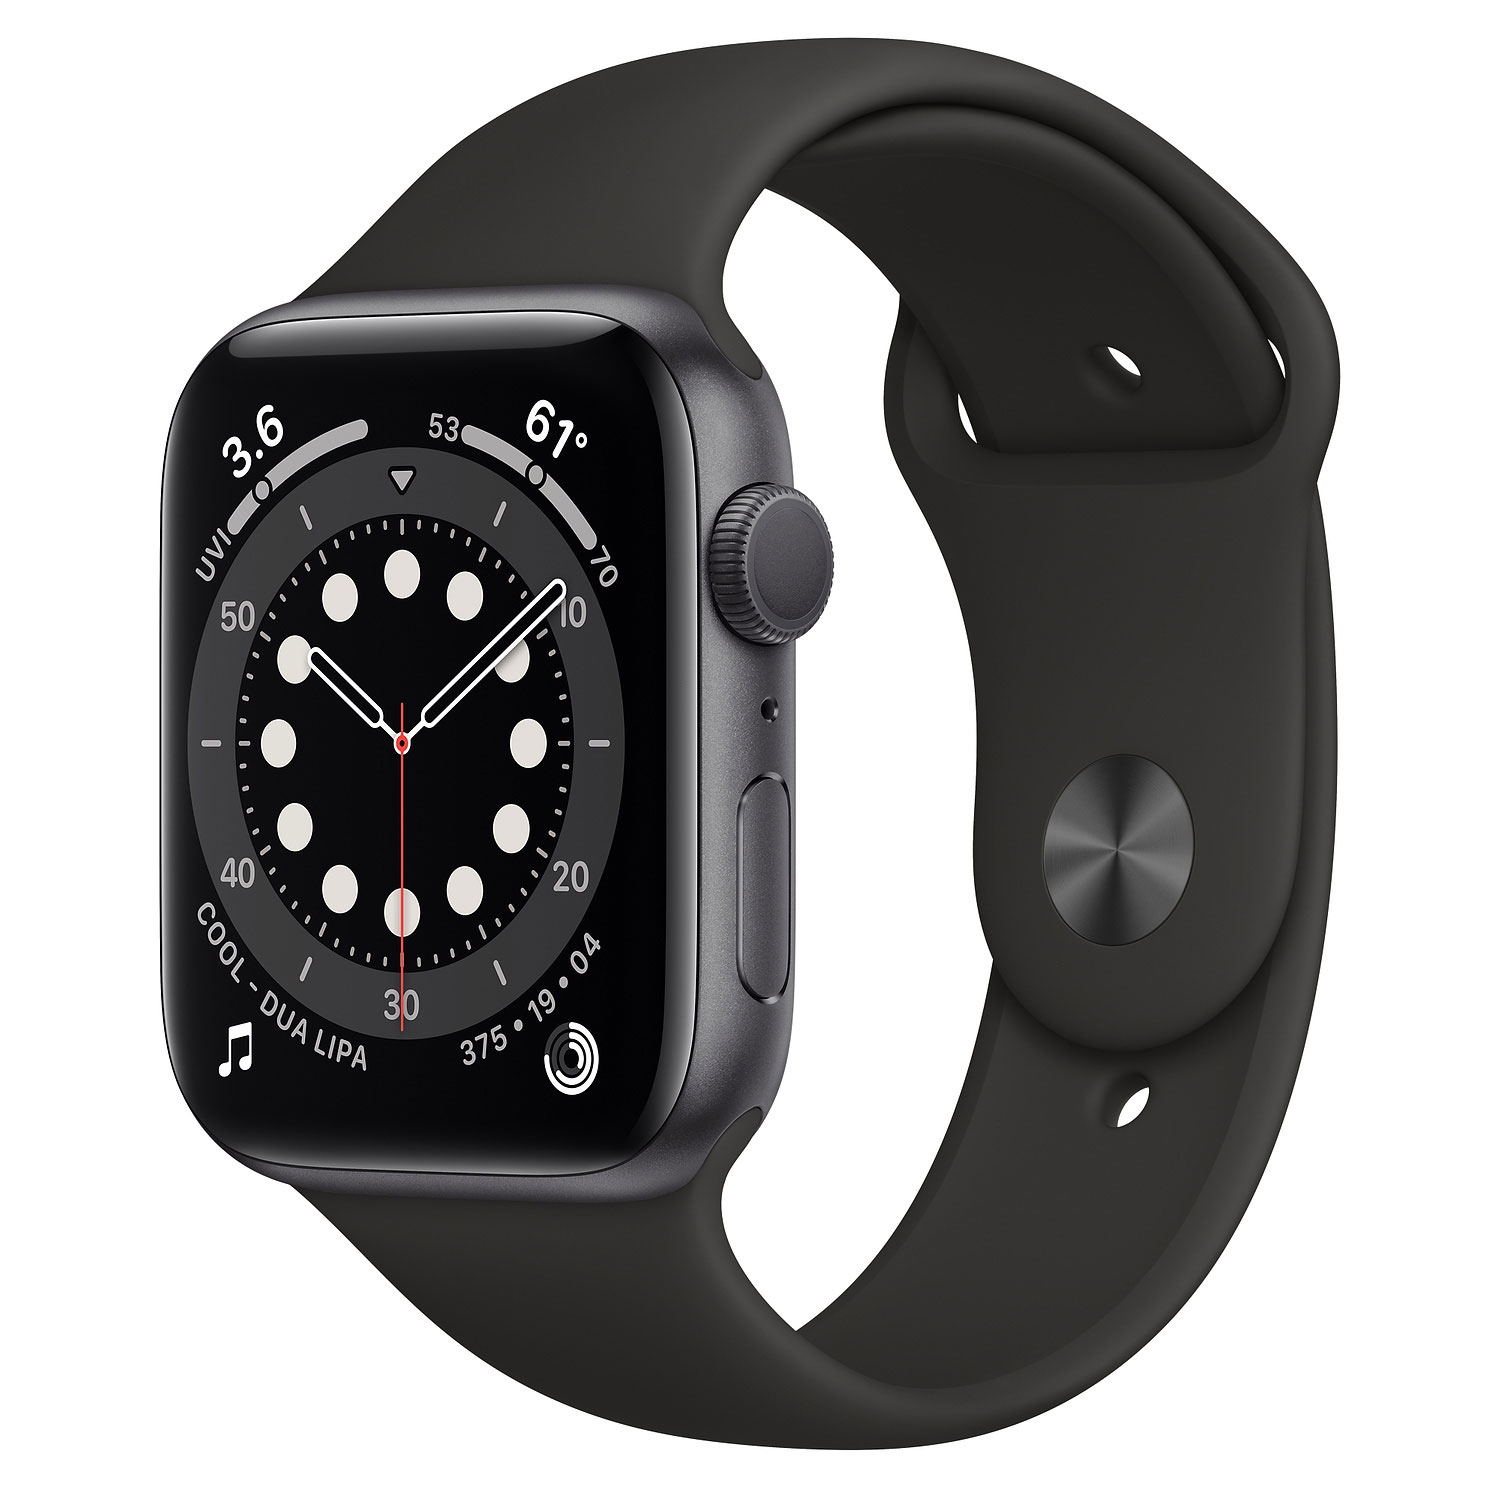 Refurbished (Fair) - Apple Watch Series 6 (GPS) 44mm Space Grey Aluminum Case with Black Sport Band